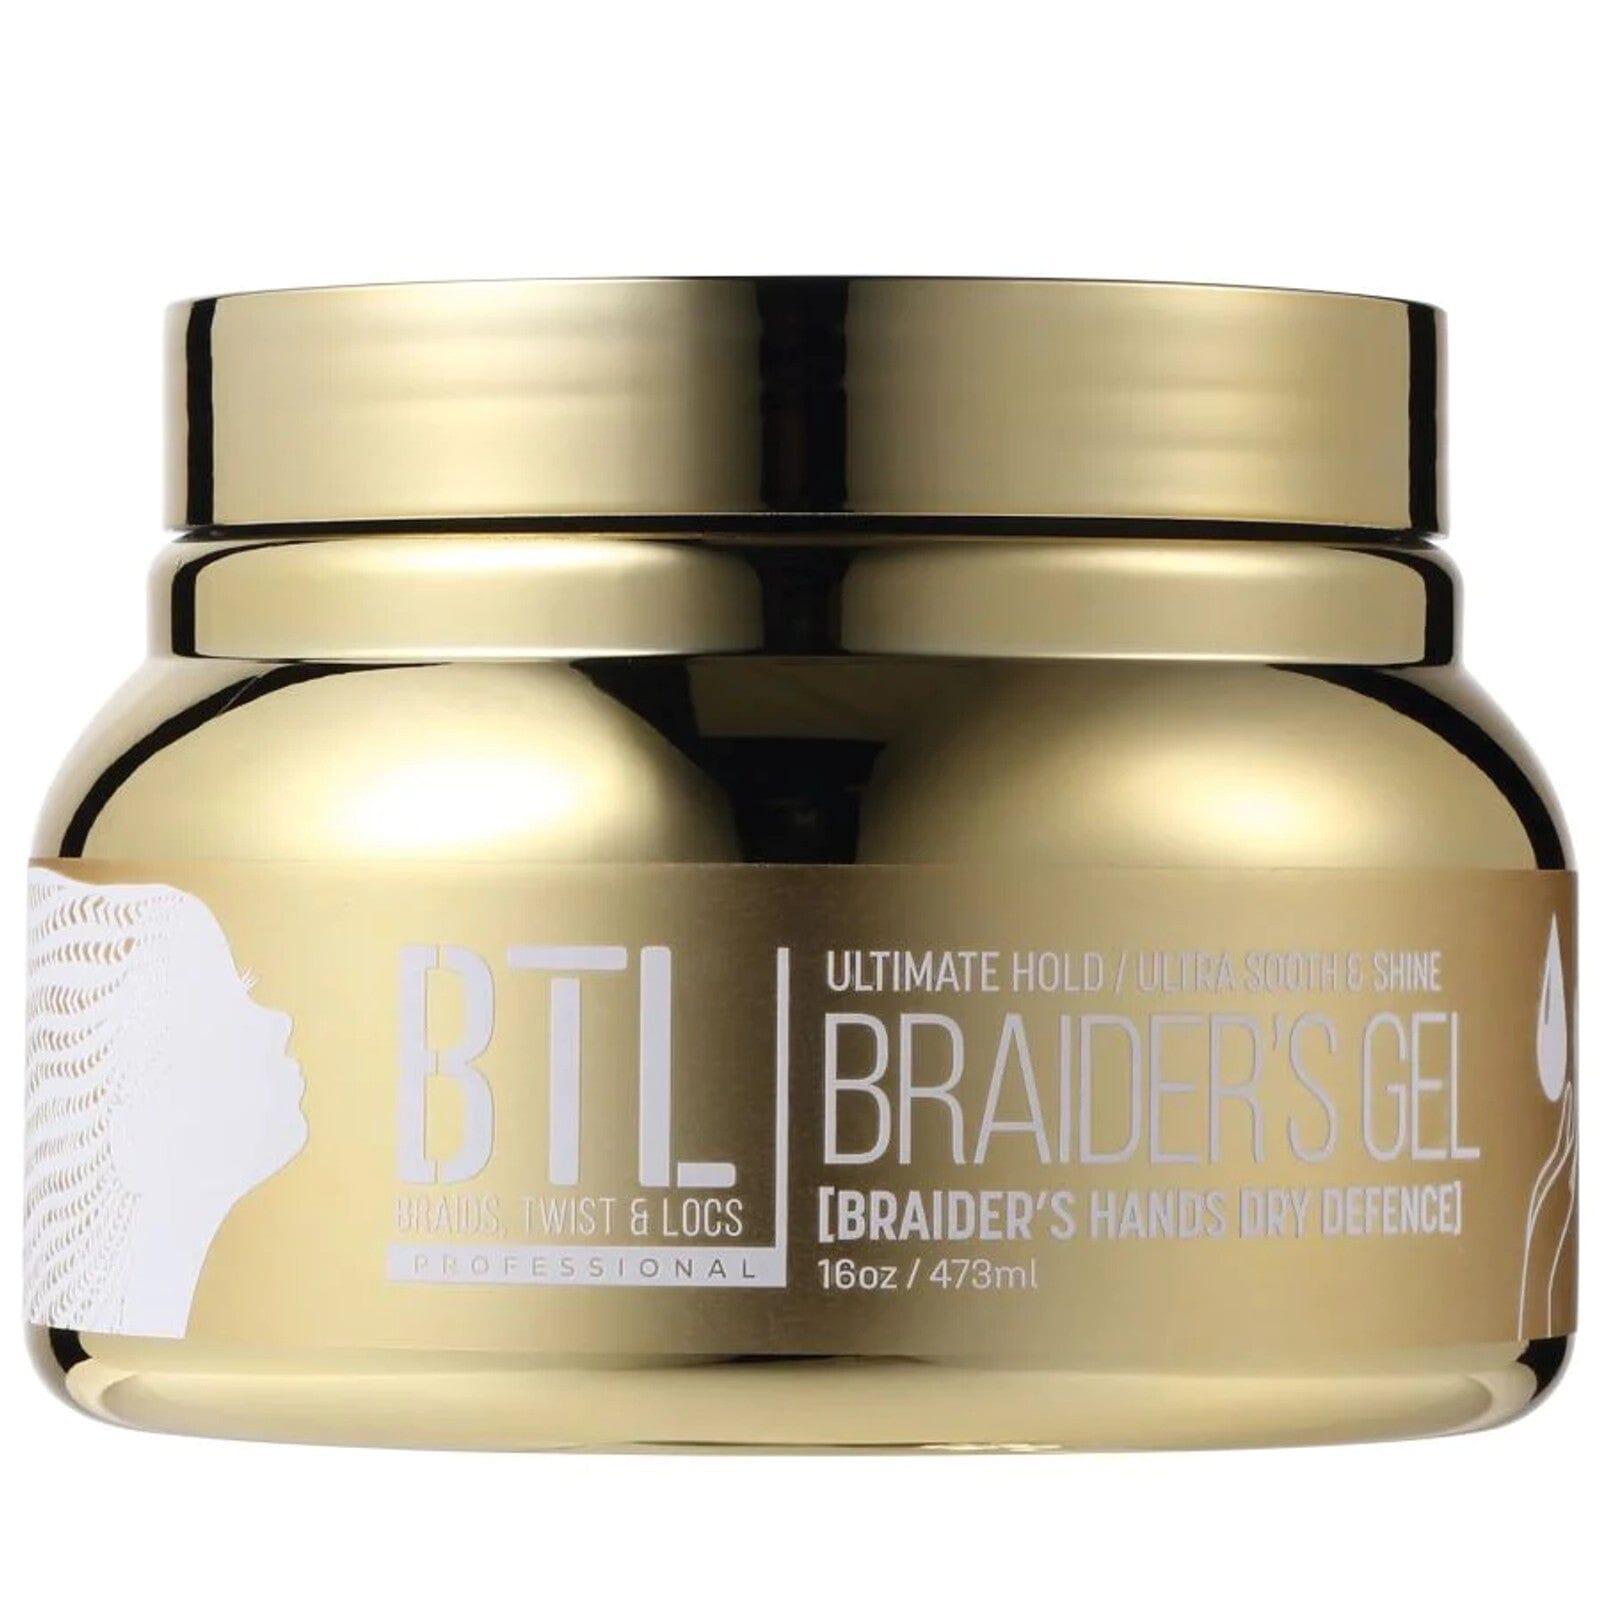 BTL Ultimate Hold Braider's Gel Gold (PC) -  : Beauty Supply,  Fashion, and Jewelry Wholesale Distributor